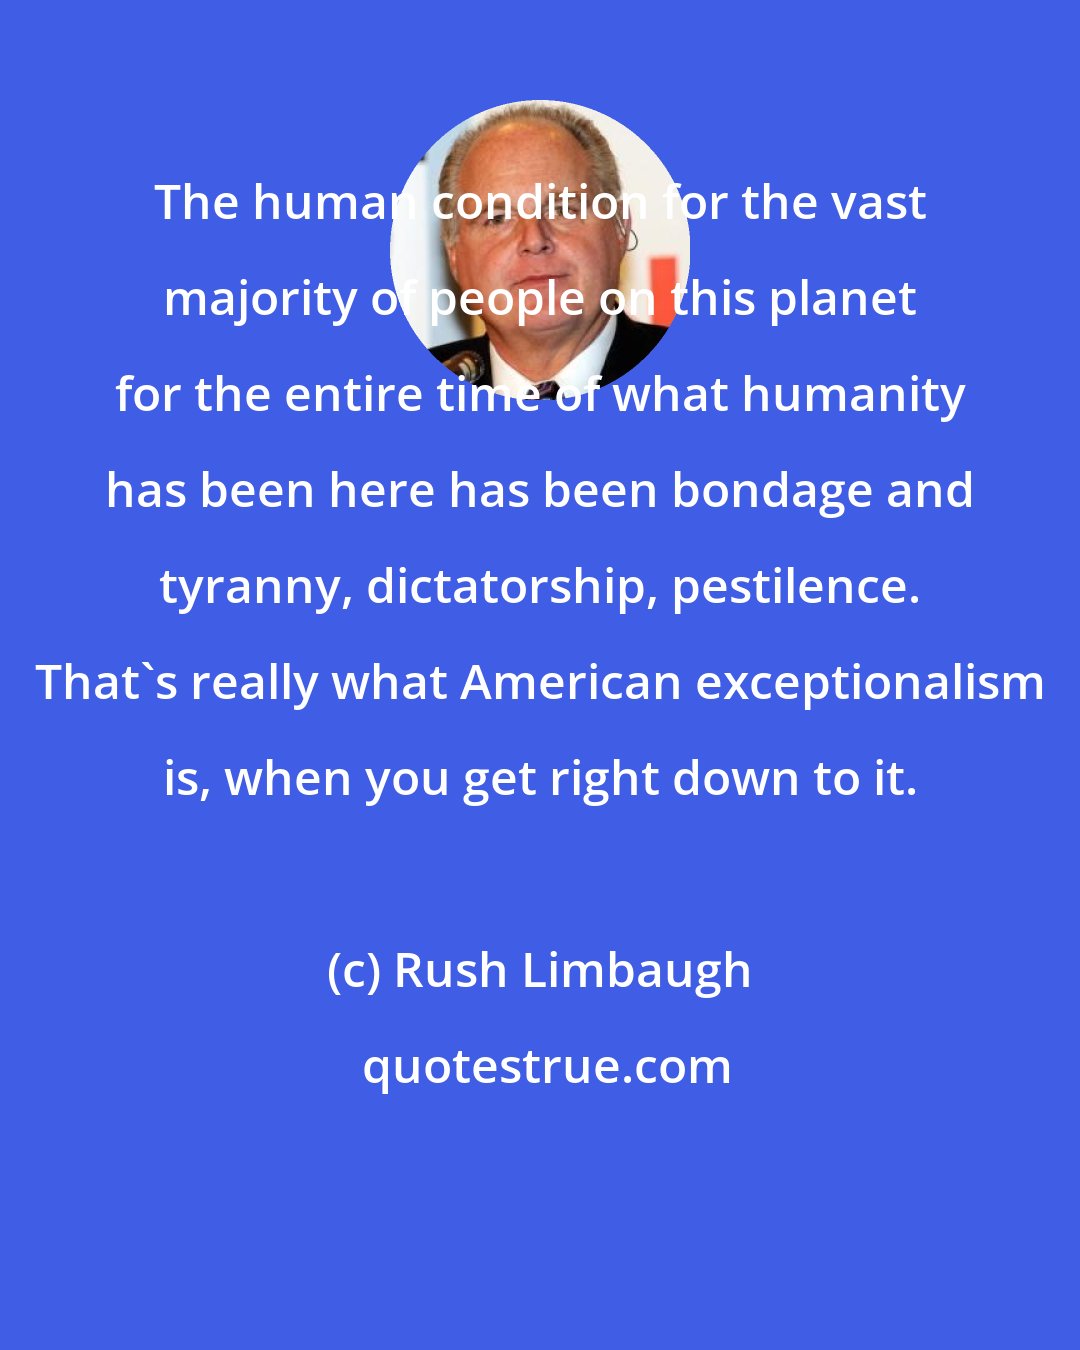 Rush Limbaugh: The human condition for the vast majority of people on this planet for the entire time of what humanity has been here has been bondage and tyranny, dictatorship, pestilence. That's really what American exceptionalism is, when you get right down to it.